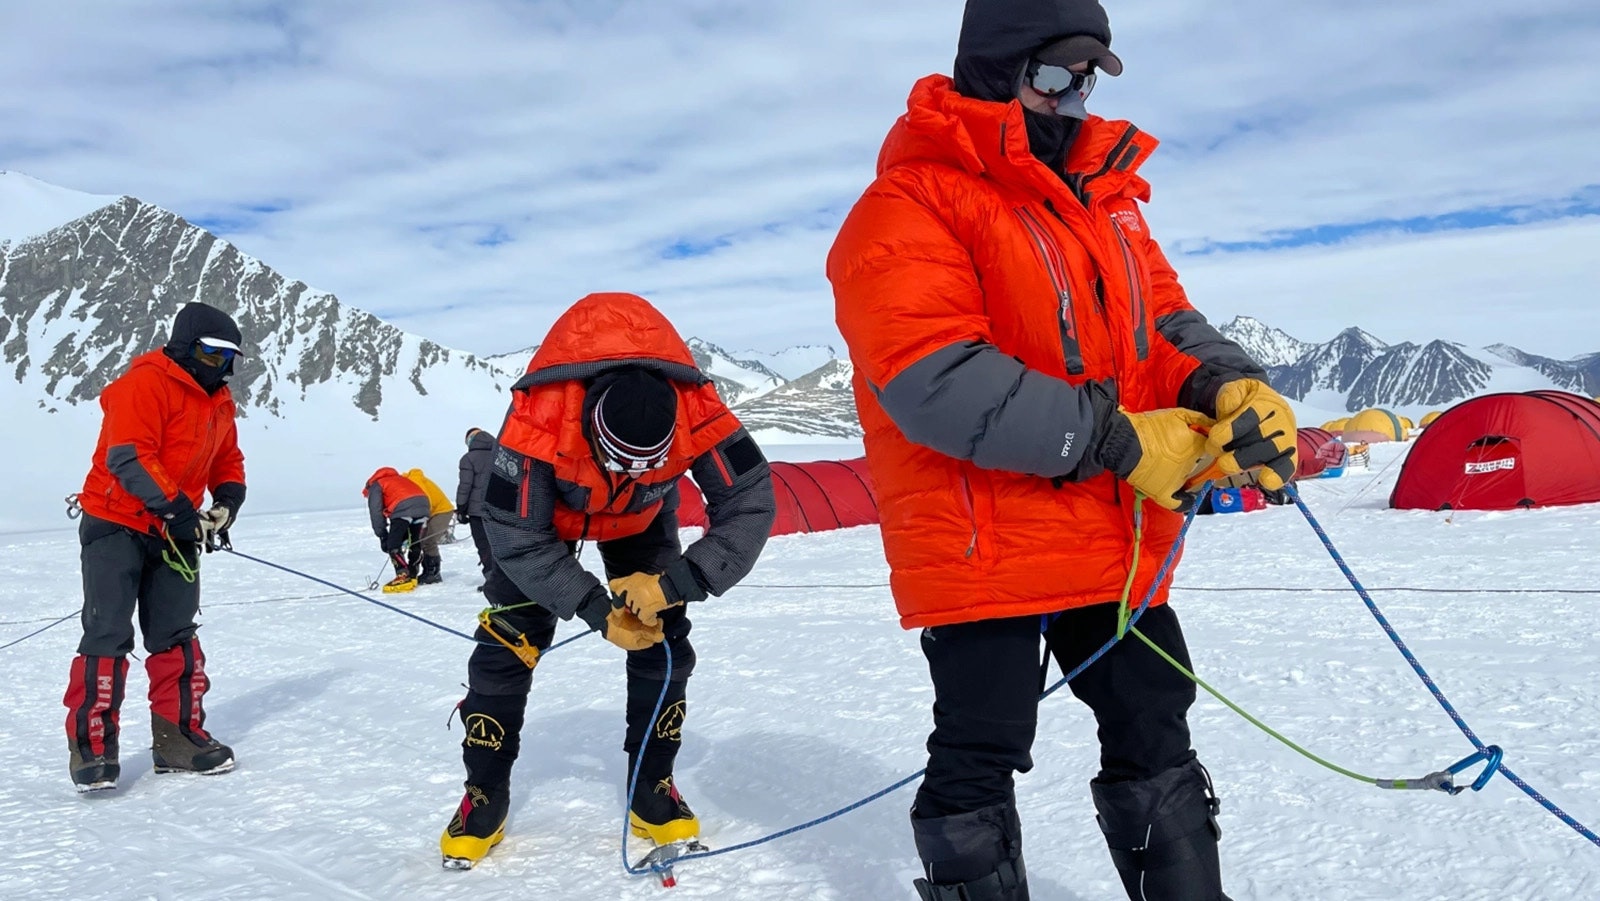 The team practices techniques while waiting for weather to clear enough to fly to the base camp for their attempt to summit Mount Vinson.